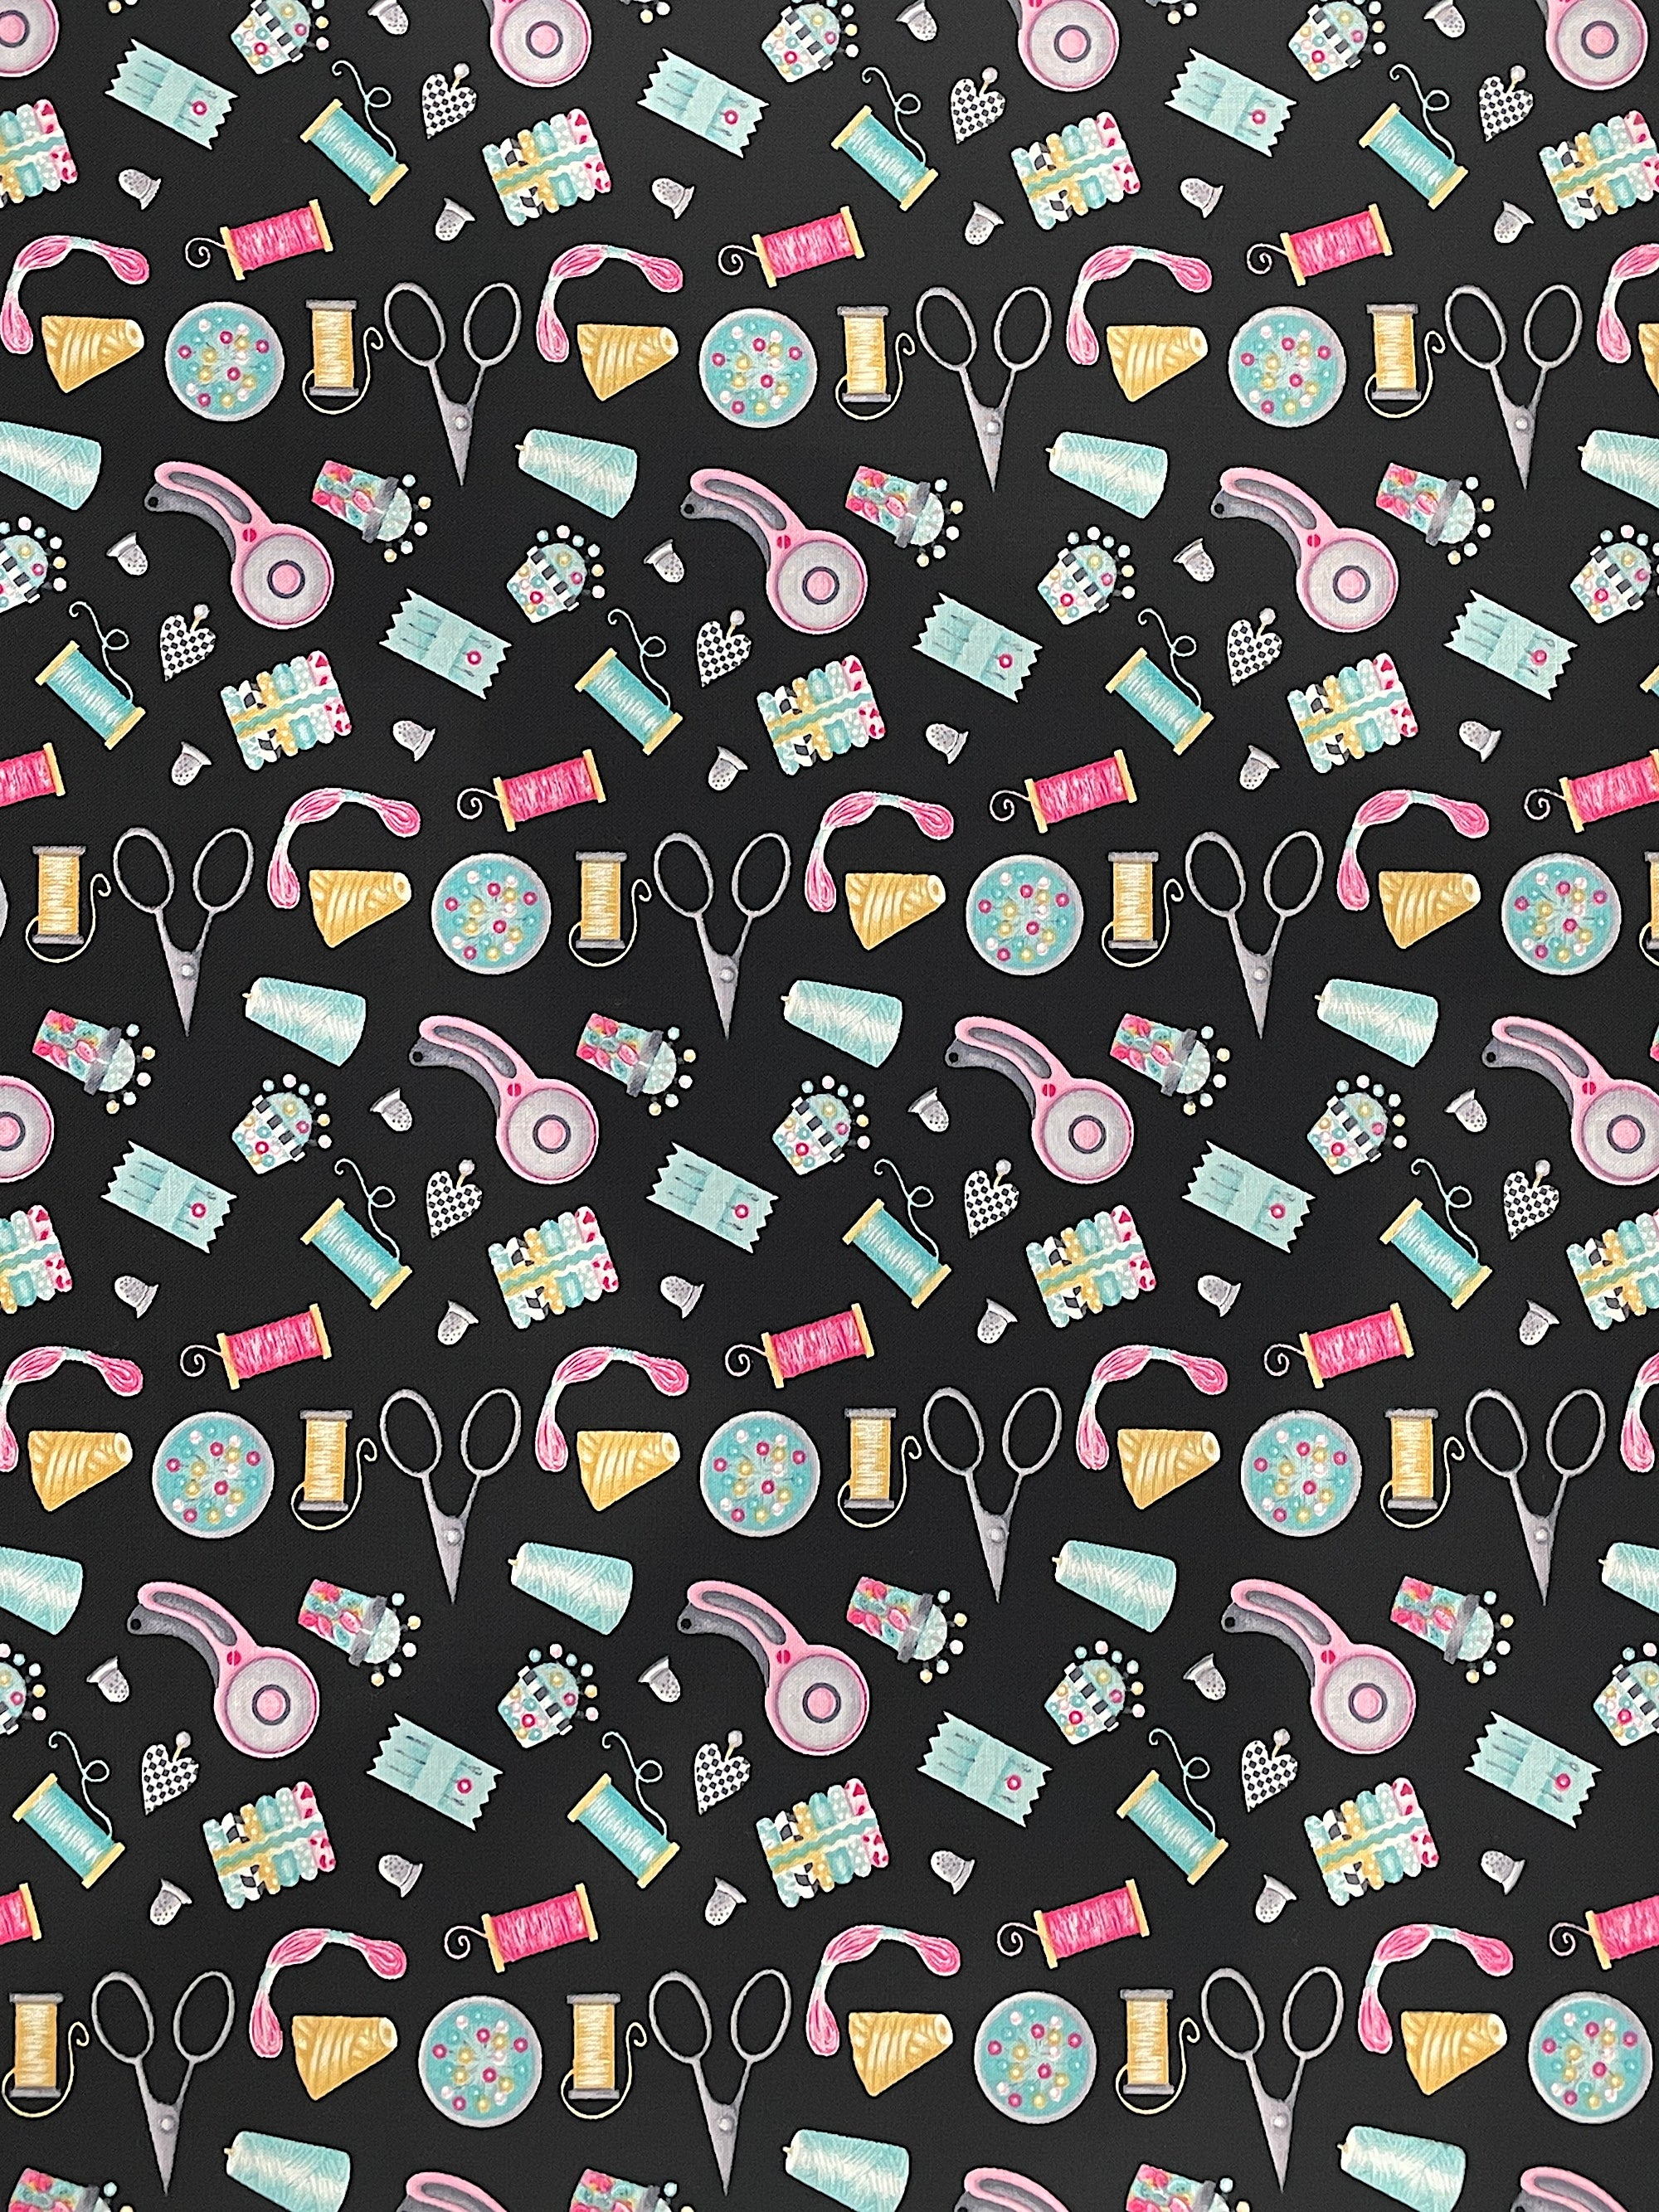 This fabric is part of the Sew, Sleep, Repeat collection by Henry Glass.&nbsp; This black fabric is covered with scissors, pin cushions, thread, rotary cutters, needles, thimbles and more.